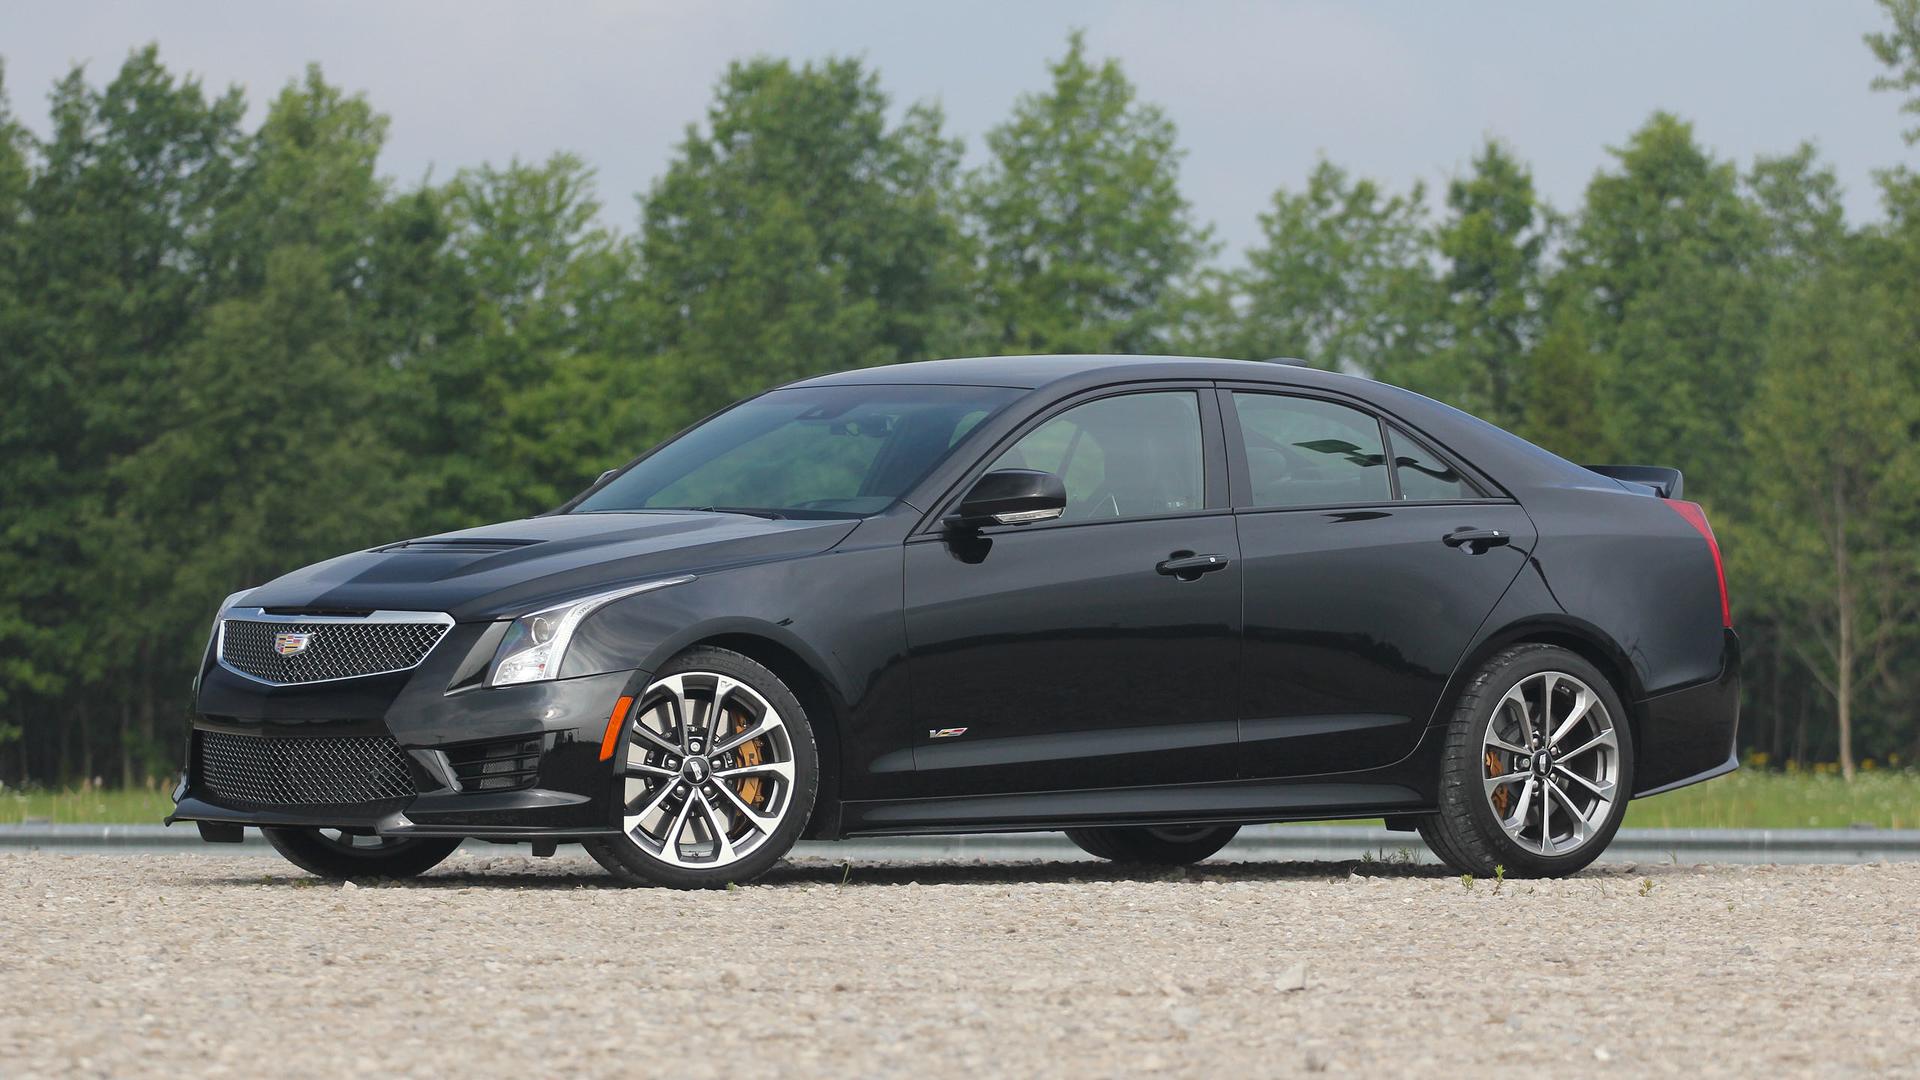 2017 Cadillac ATS-V Review: Achieving Oversized Ambitions